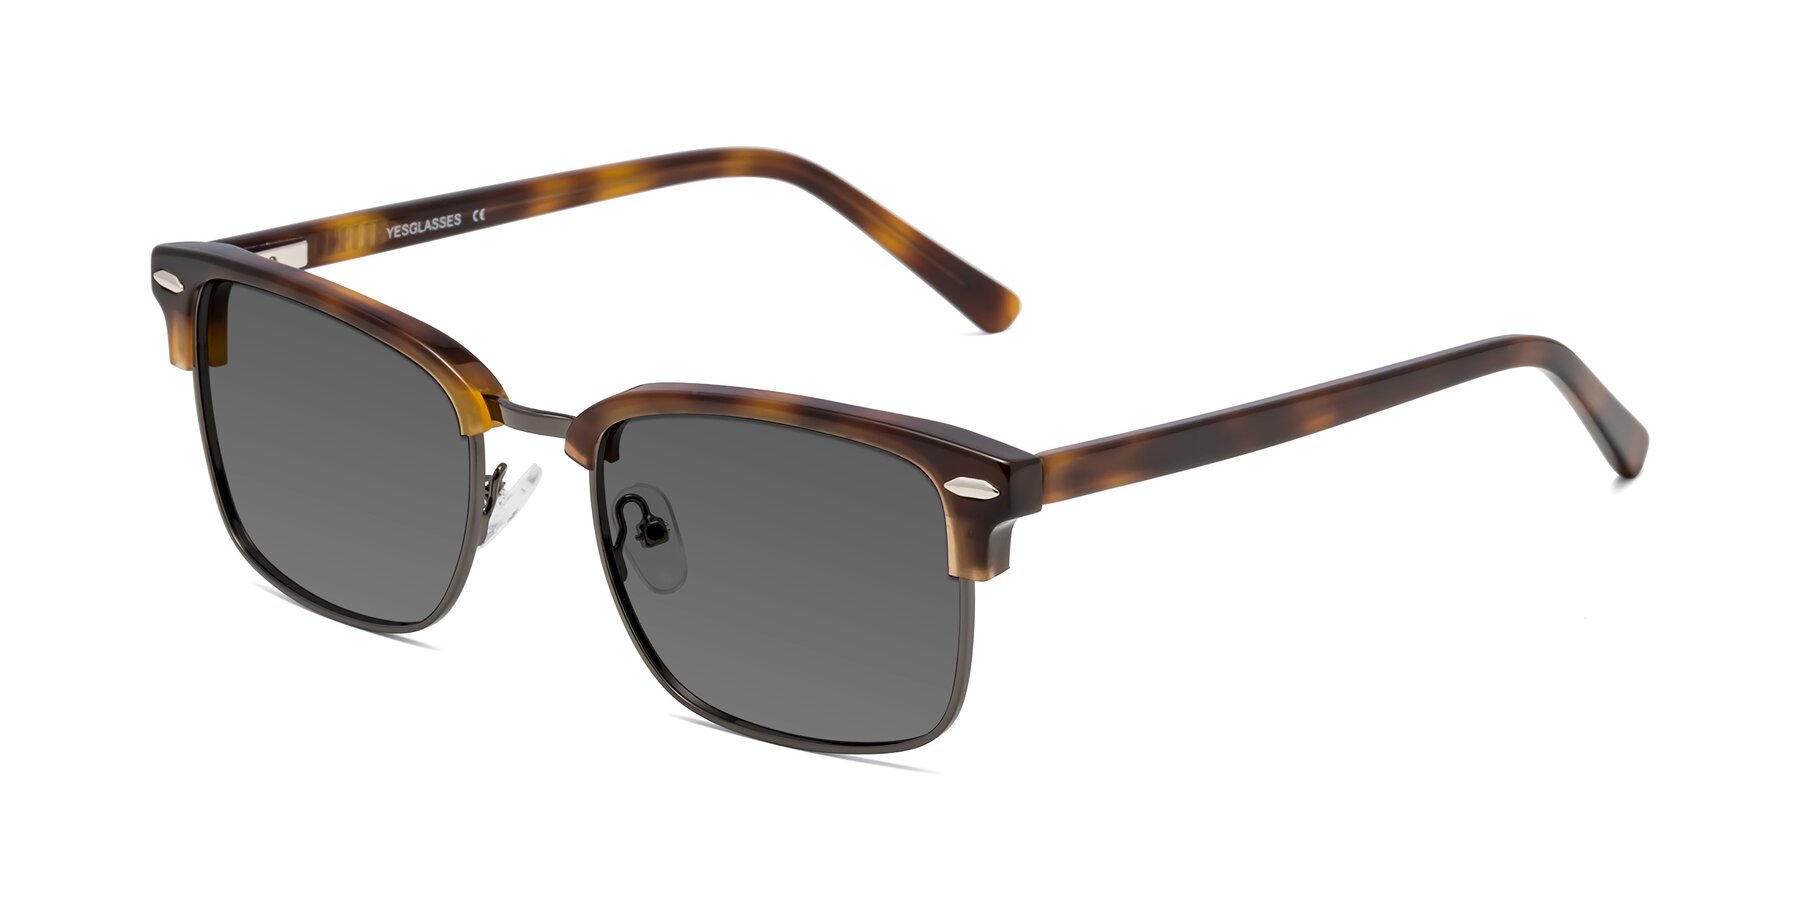 Angle of 17464 in Tortoise/ Gunmetal with Medium Gray Tinted Lenses